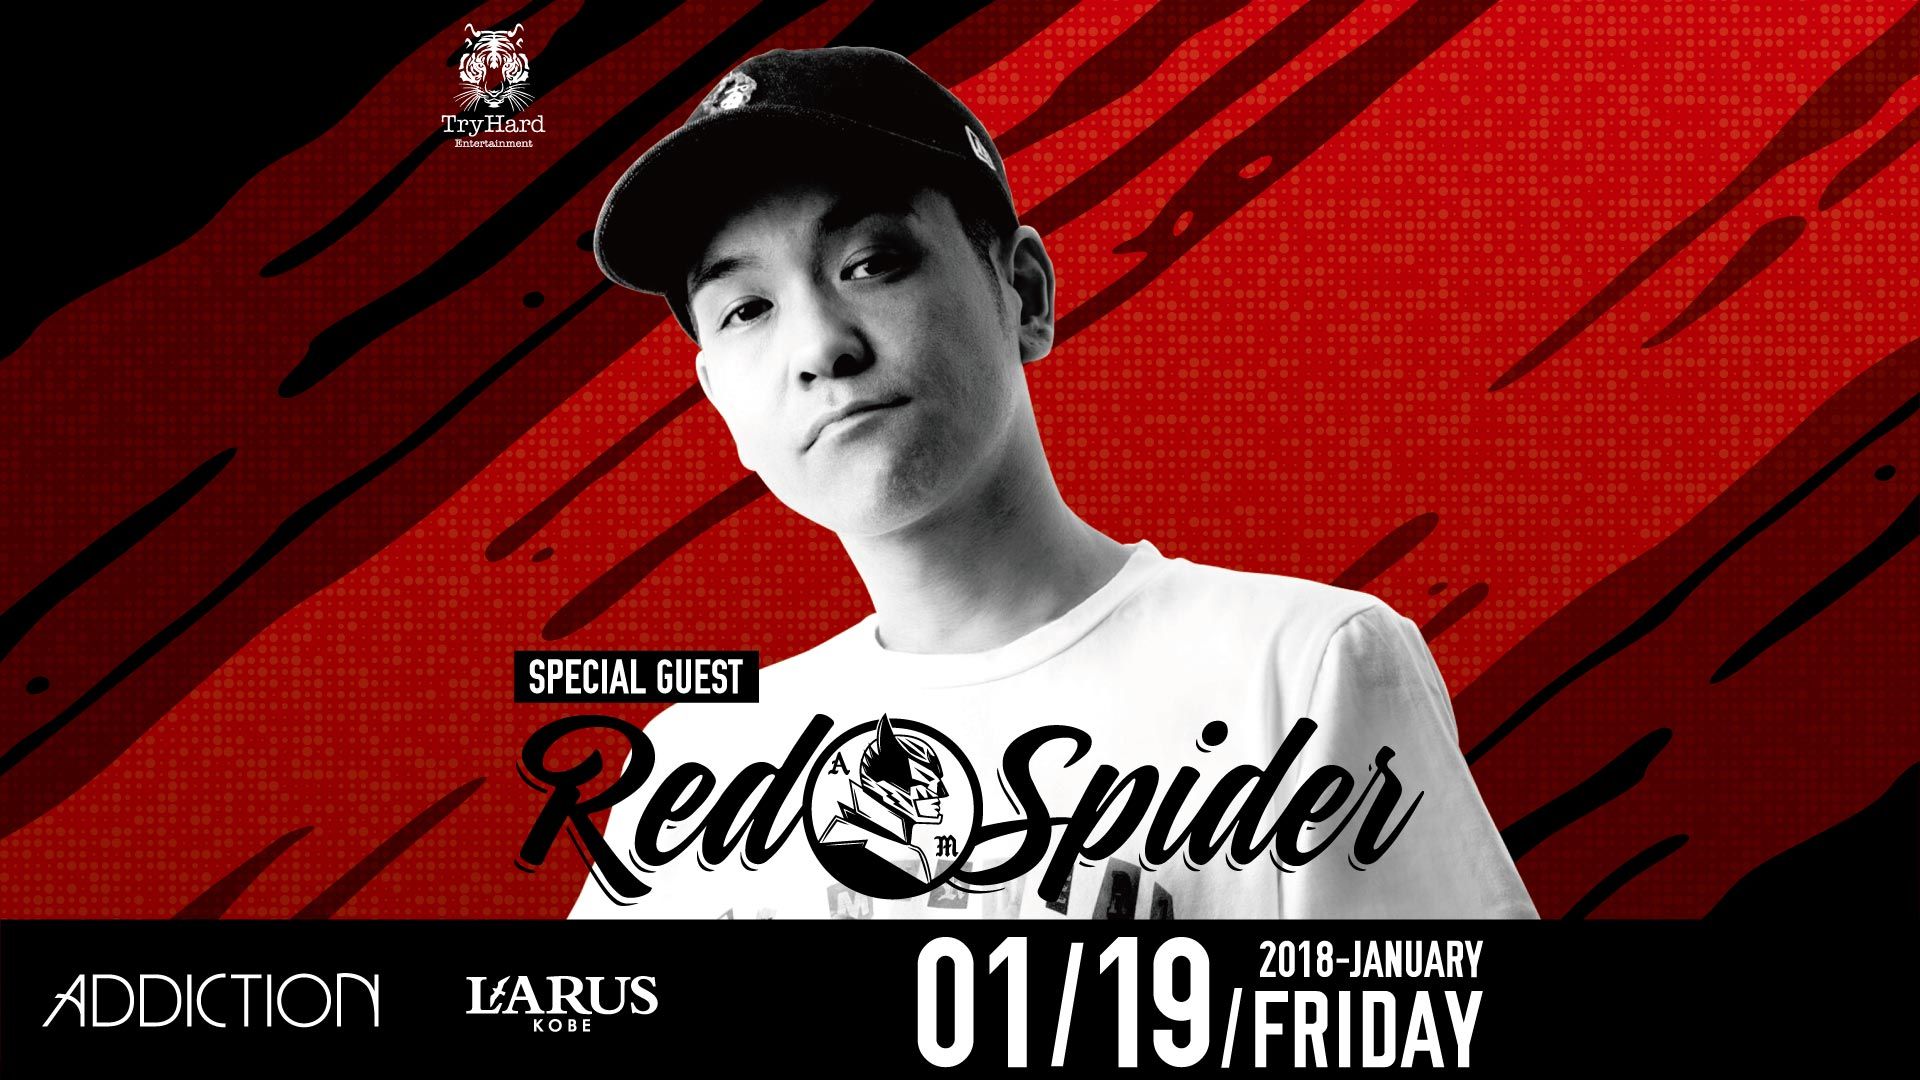 SPECIAL GUEST : Red Spider / ADDICTION